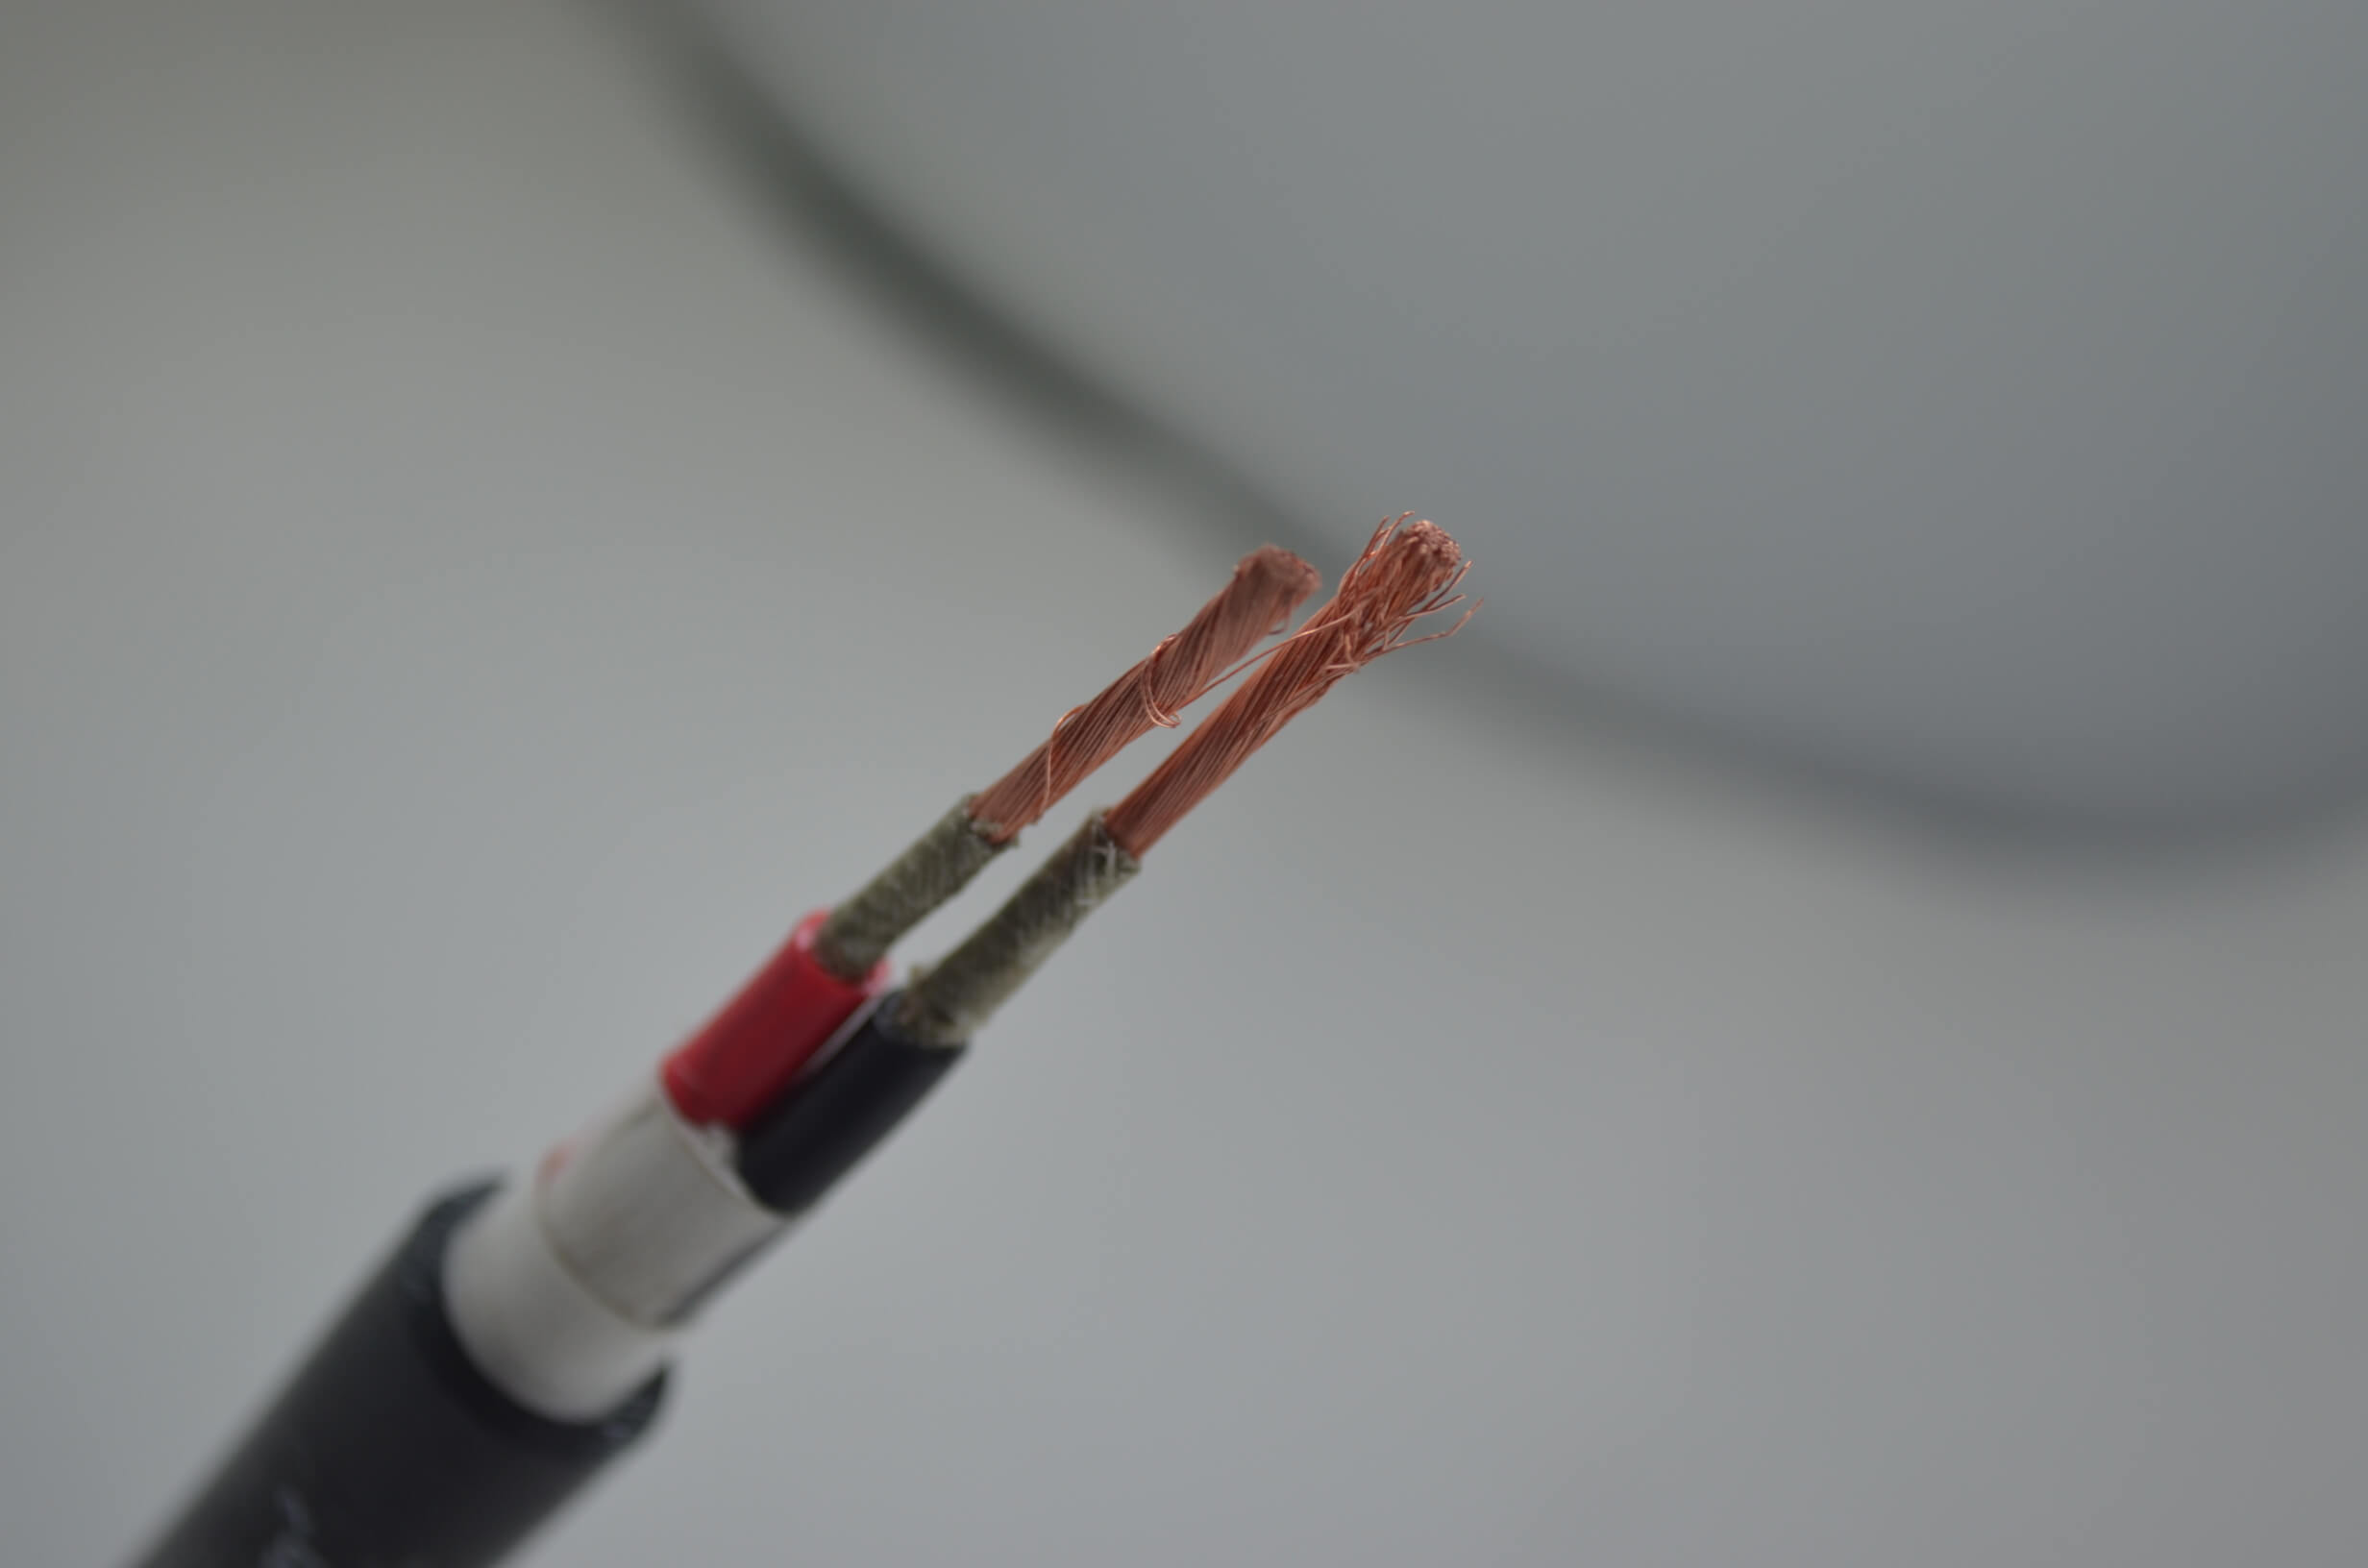 300/500V 2 core 1 mm flexible cable PVC insulated PVC sheathed 18 awg low voltage cable wire